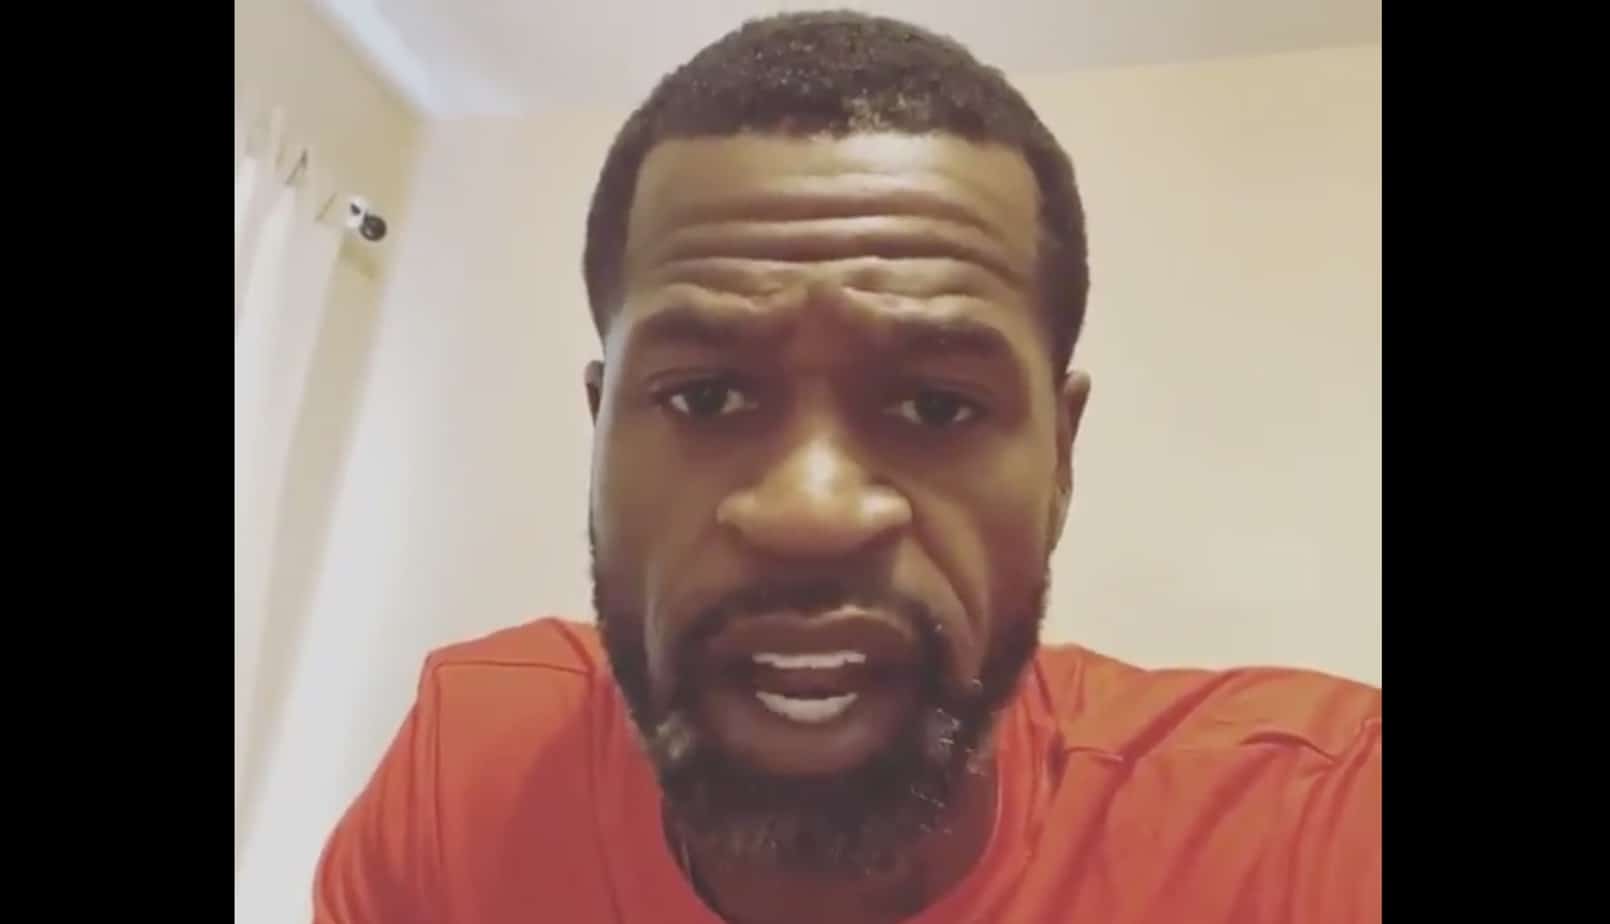 Stephen Jackson came to the defense of DeSean Jackson after his anti-semetic Instagram post about Hitler went viral.